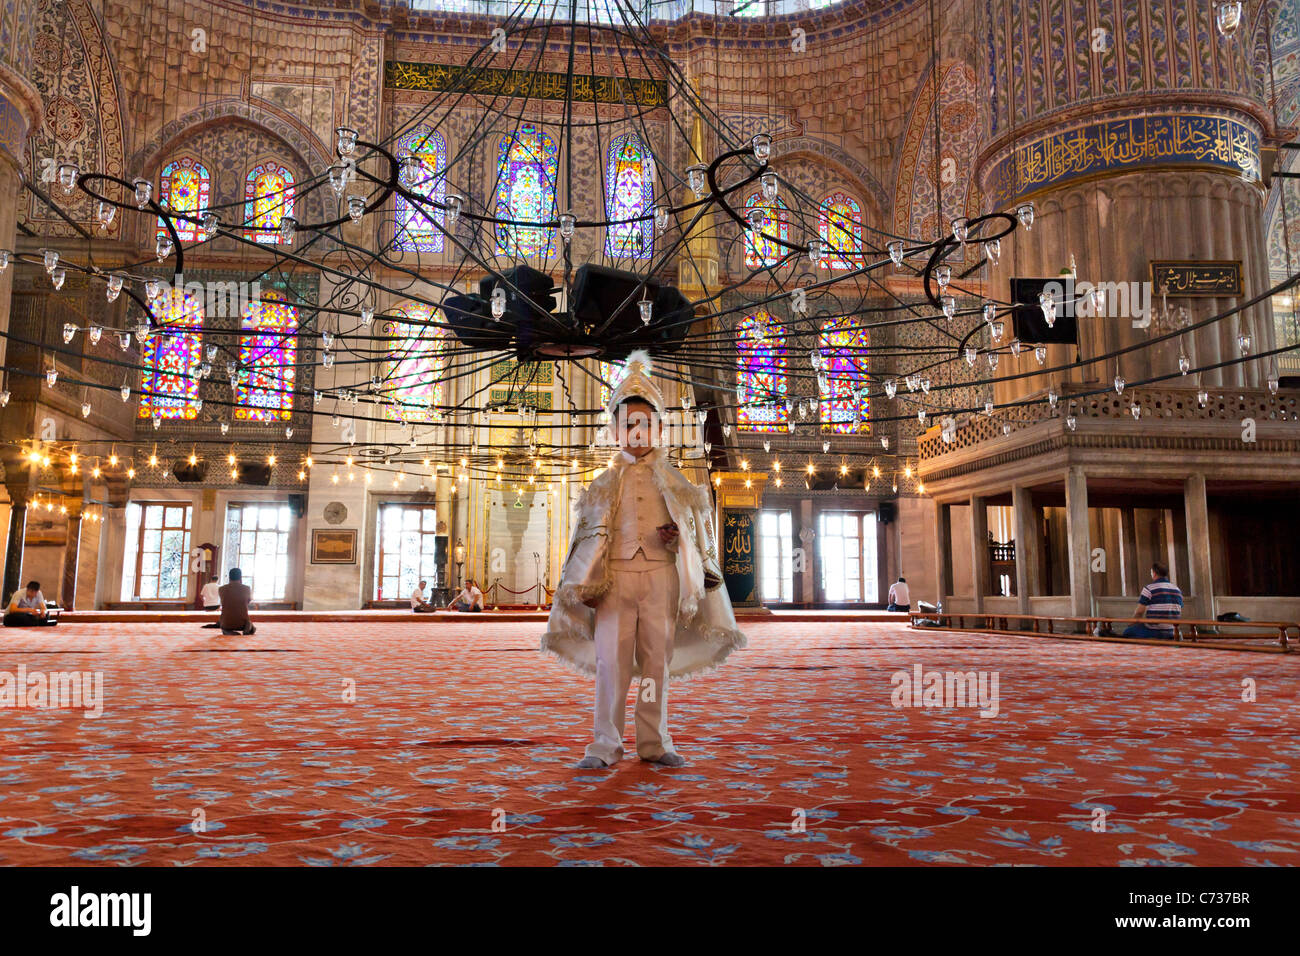 Young Turkish boy in their ceremonial circumcision outfit at The Blue Mosque in Turkey Stock Photo